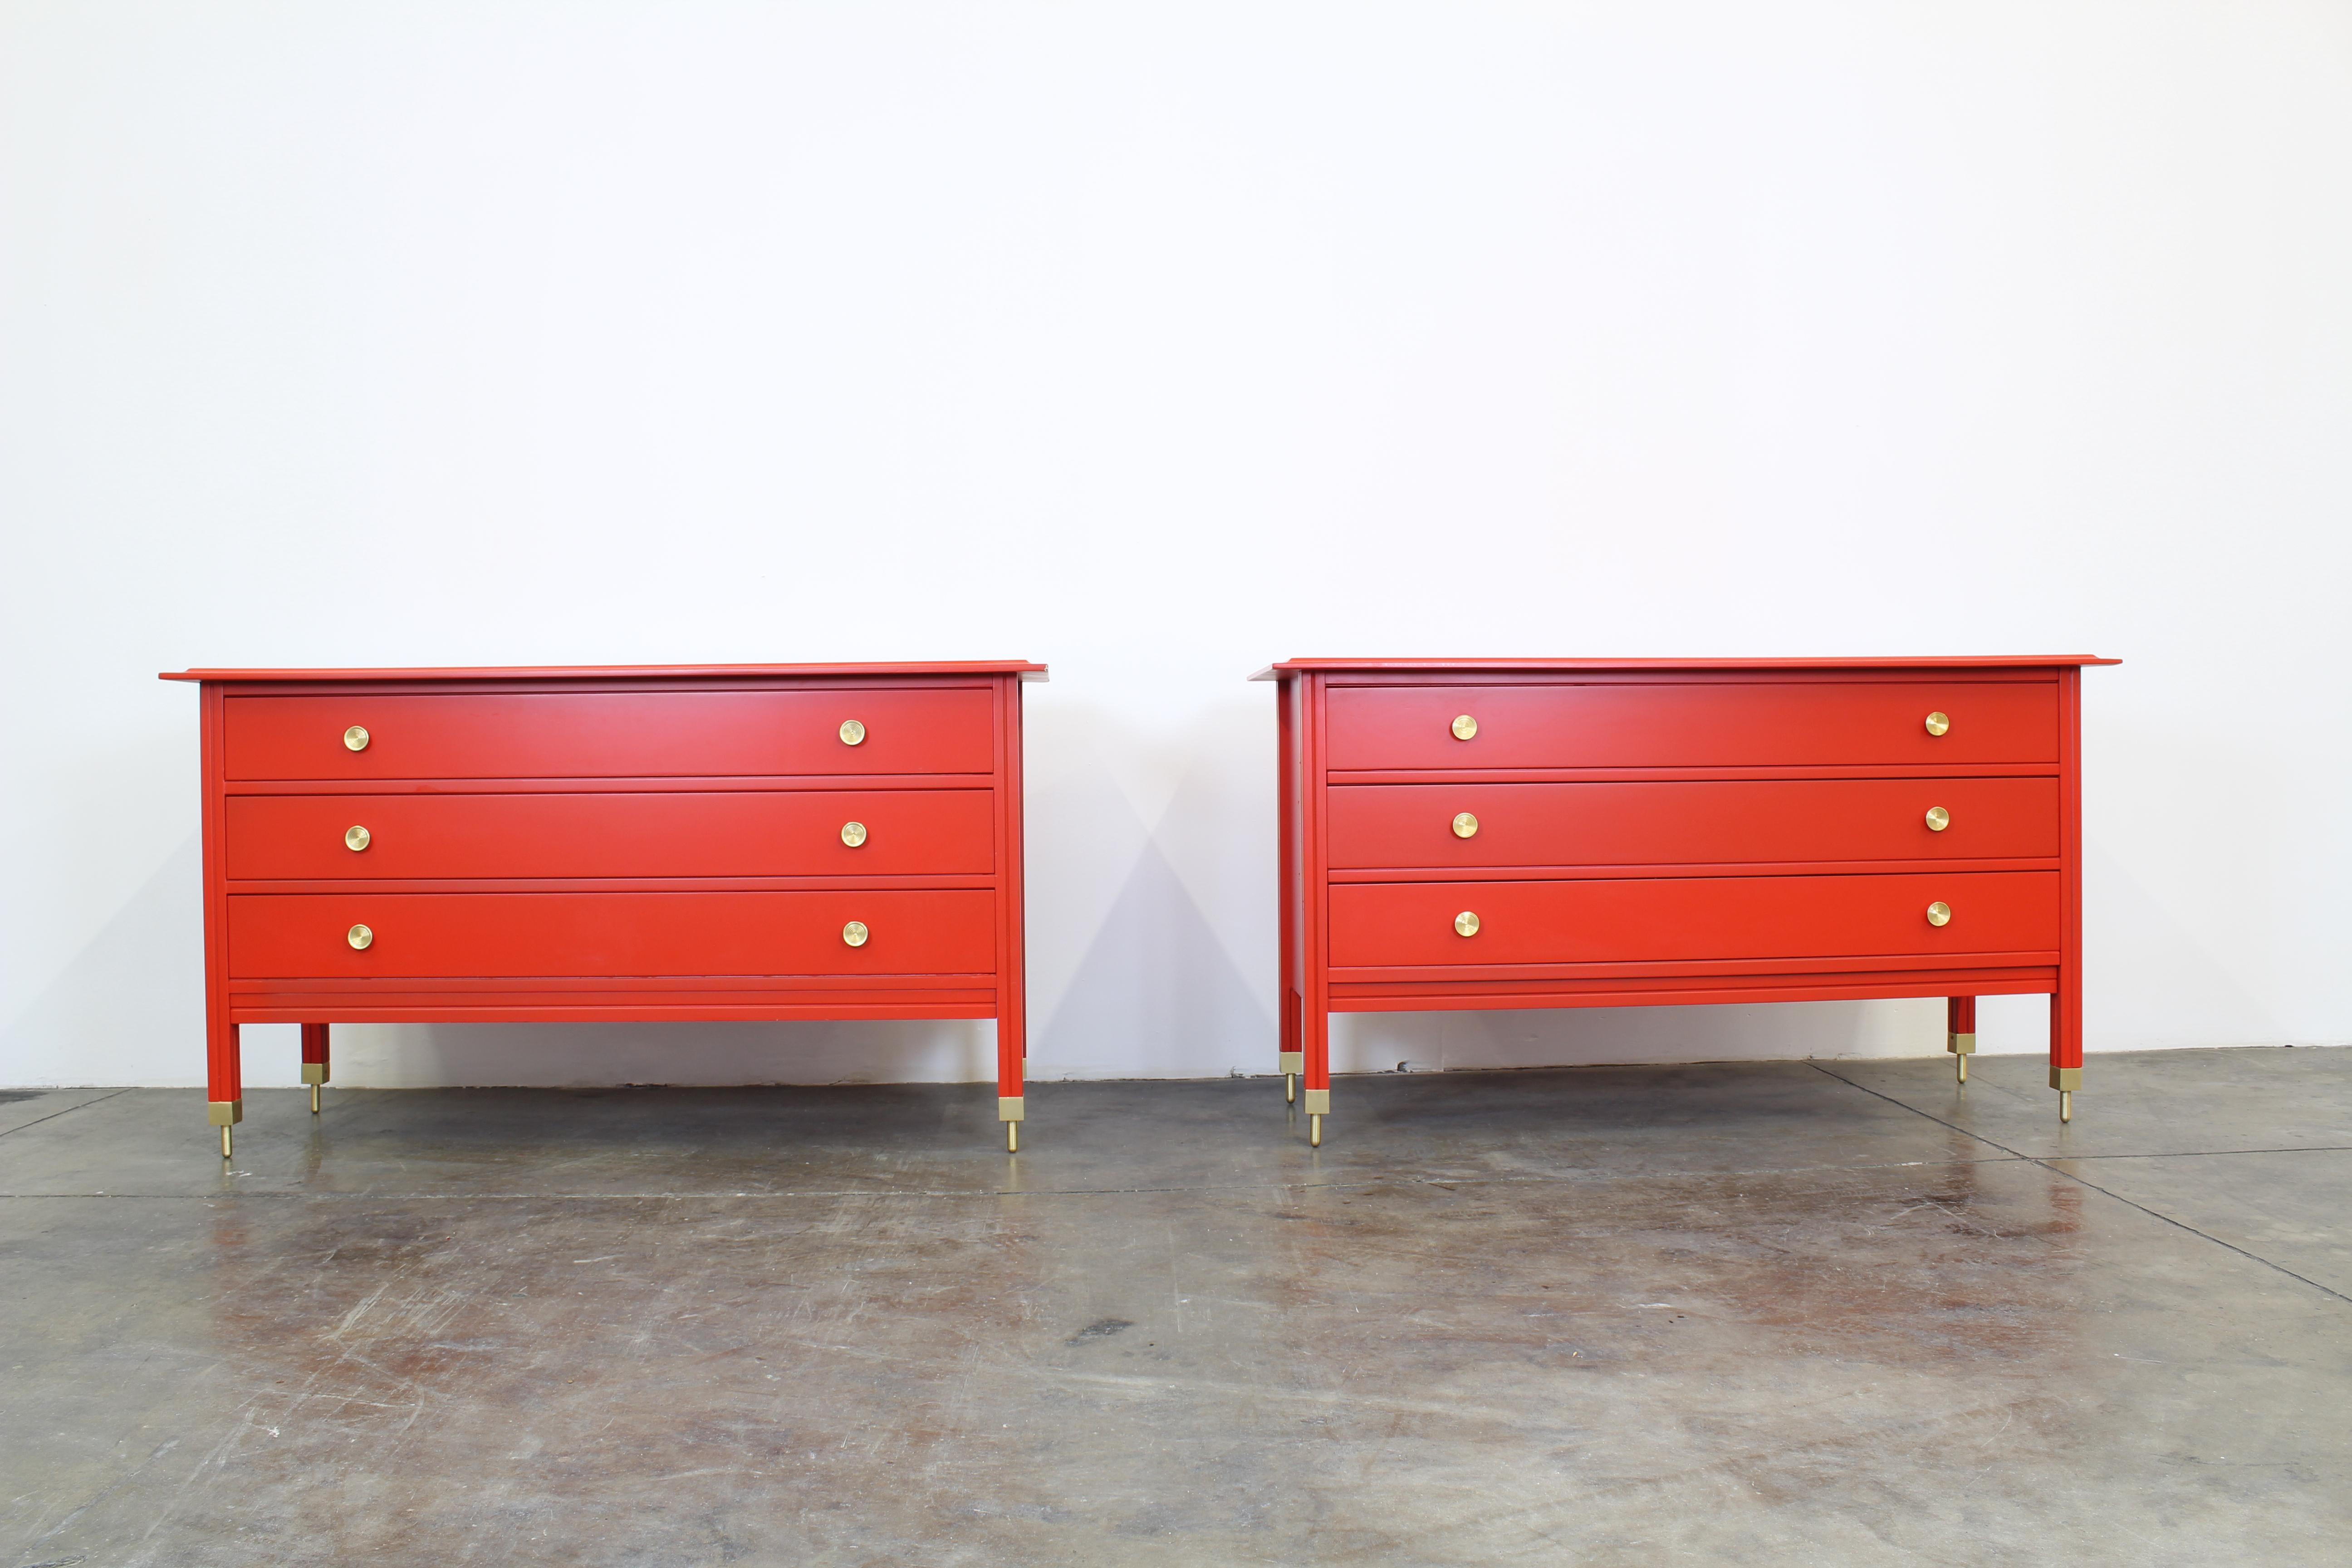 Chest of drawers 'D 154' by Carlo de Carli for Sormani
Manufactured in Italy, 1963
Red Lacquered wood, brass.
Measures: Width 143 x Depth 54 x Height 80 Cm.